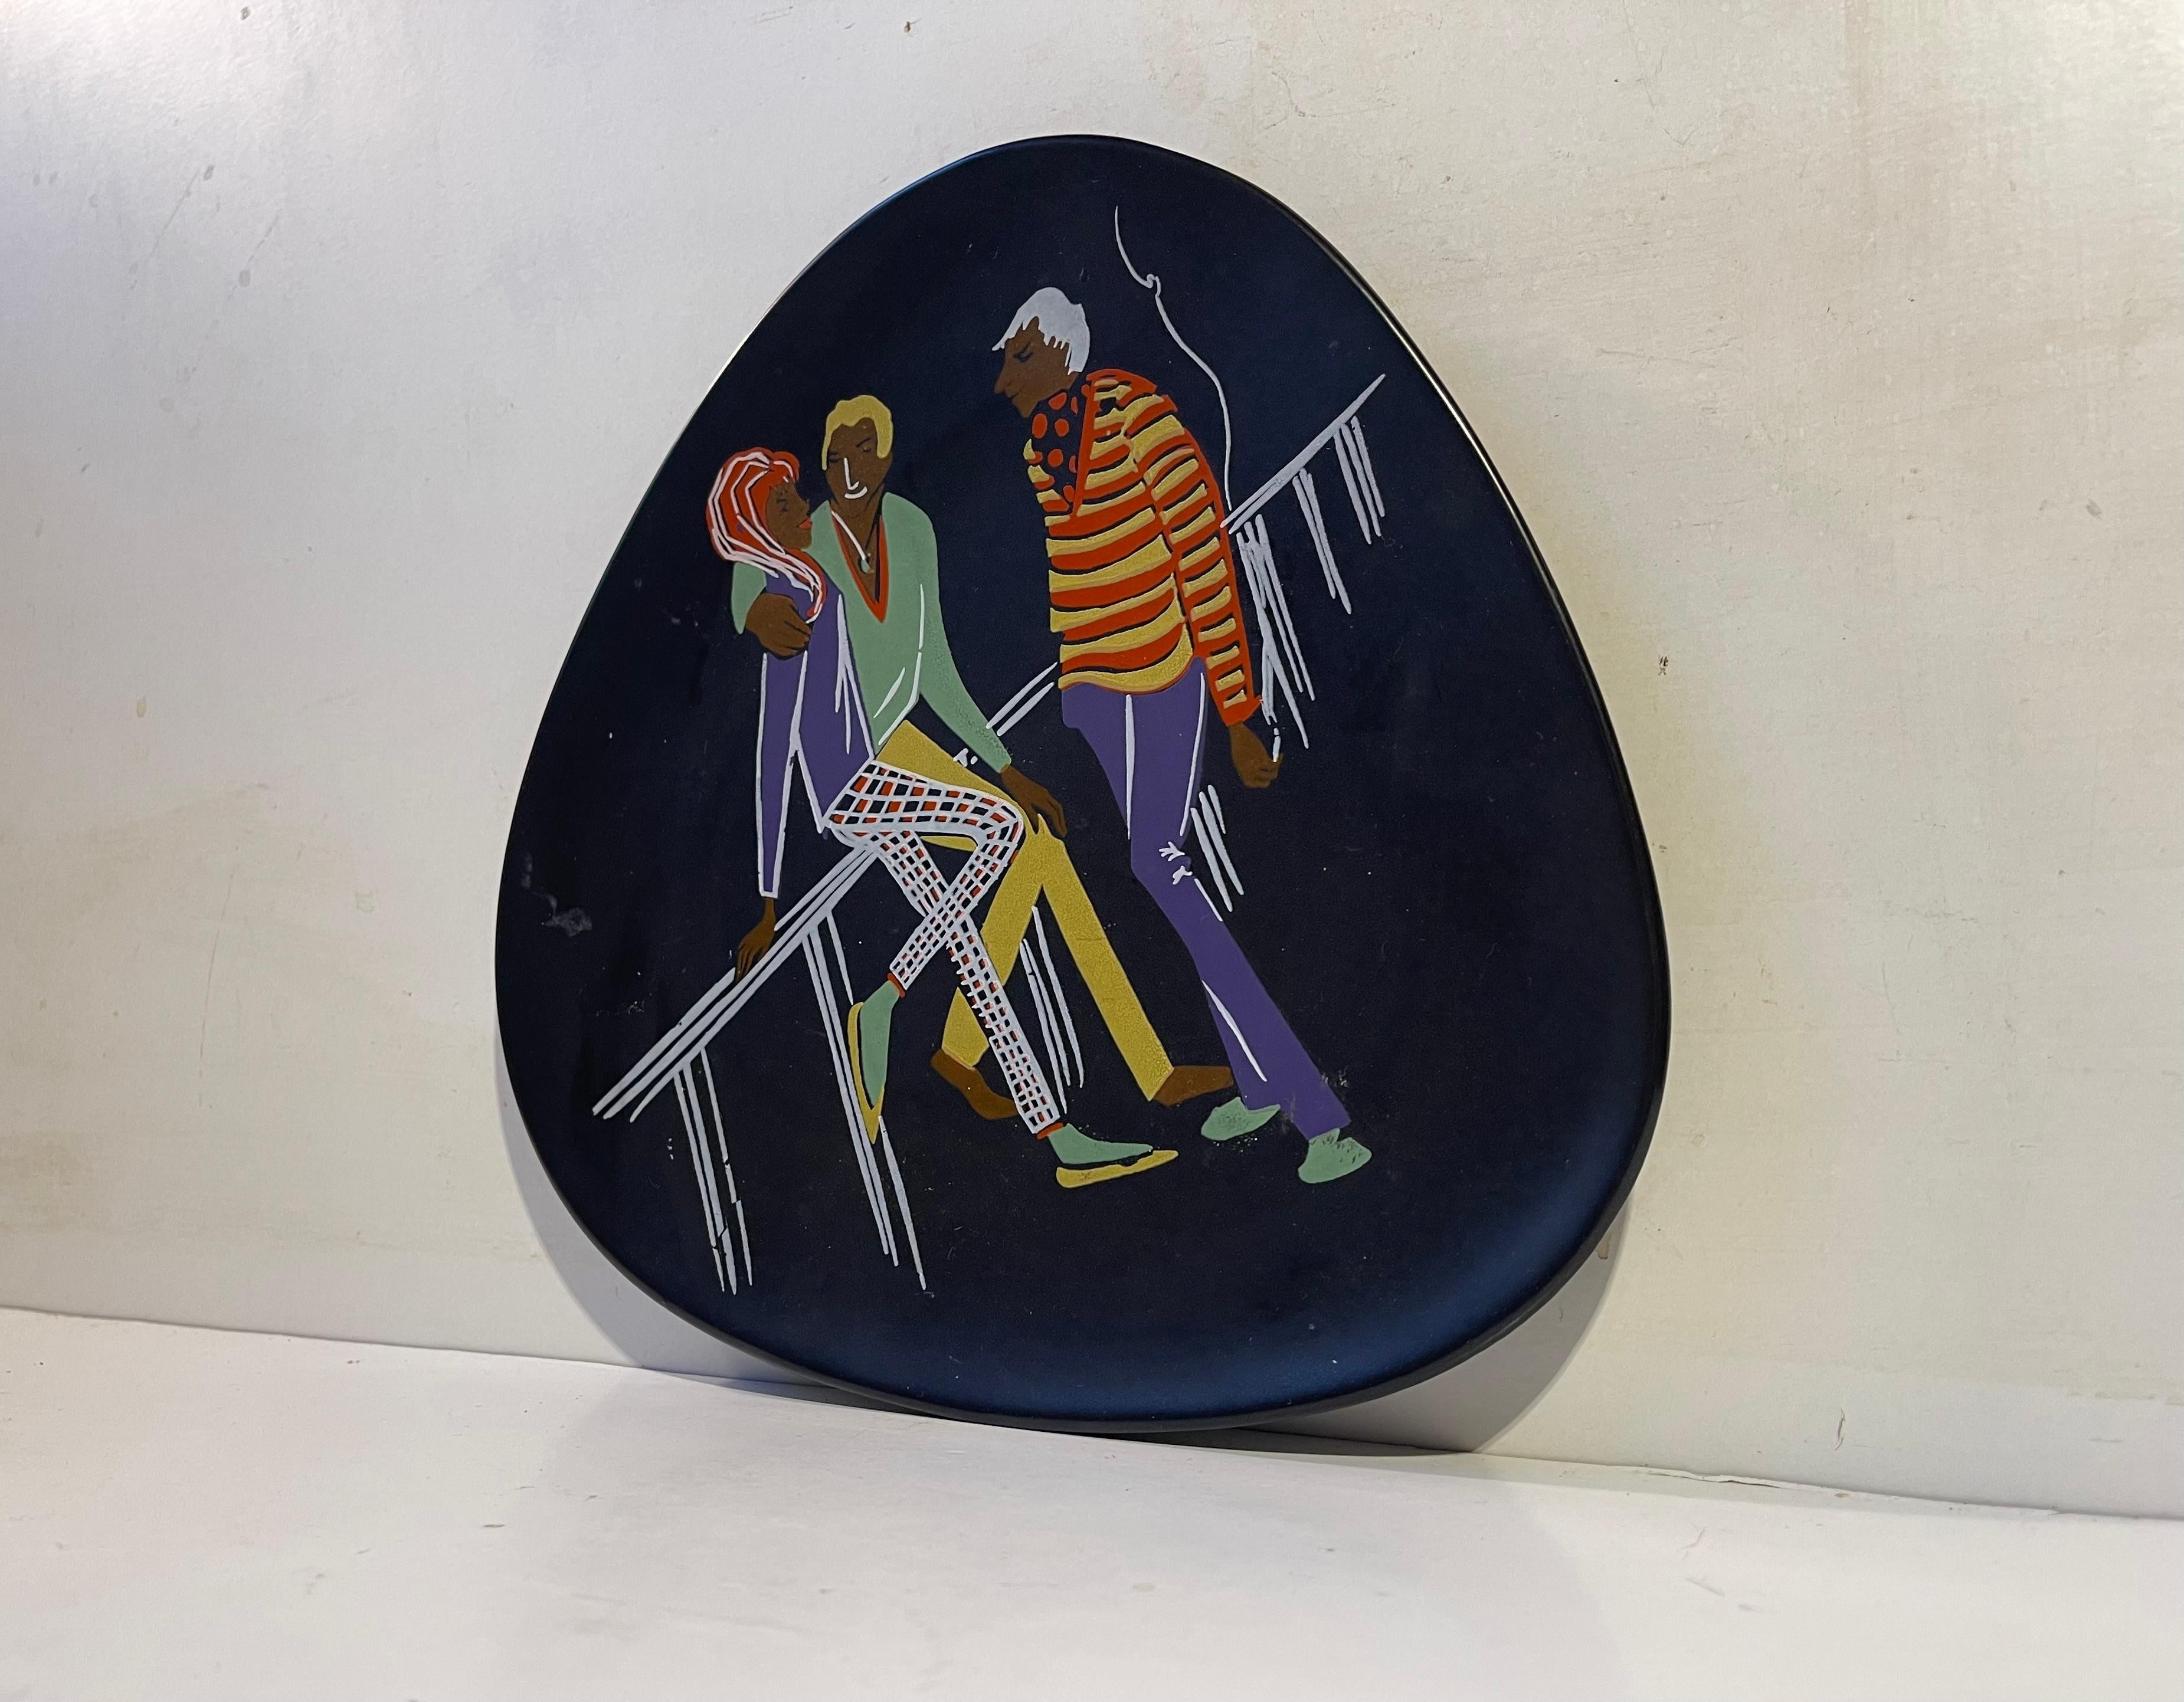 Boheme Fashionista black palet shaped dish or plate decorated with 3 young people dressed in vibrant color. Designed and made at Üebelacker Kermit in West Germany during the 1950s or 60s. Very similar to designs from Keto Keramik and Hans Welling in